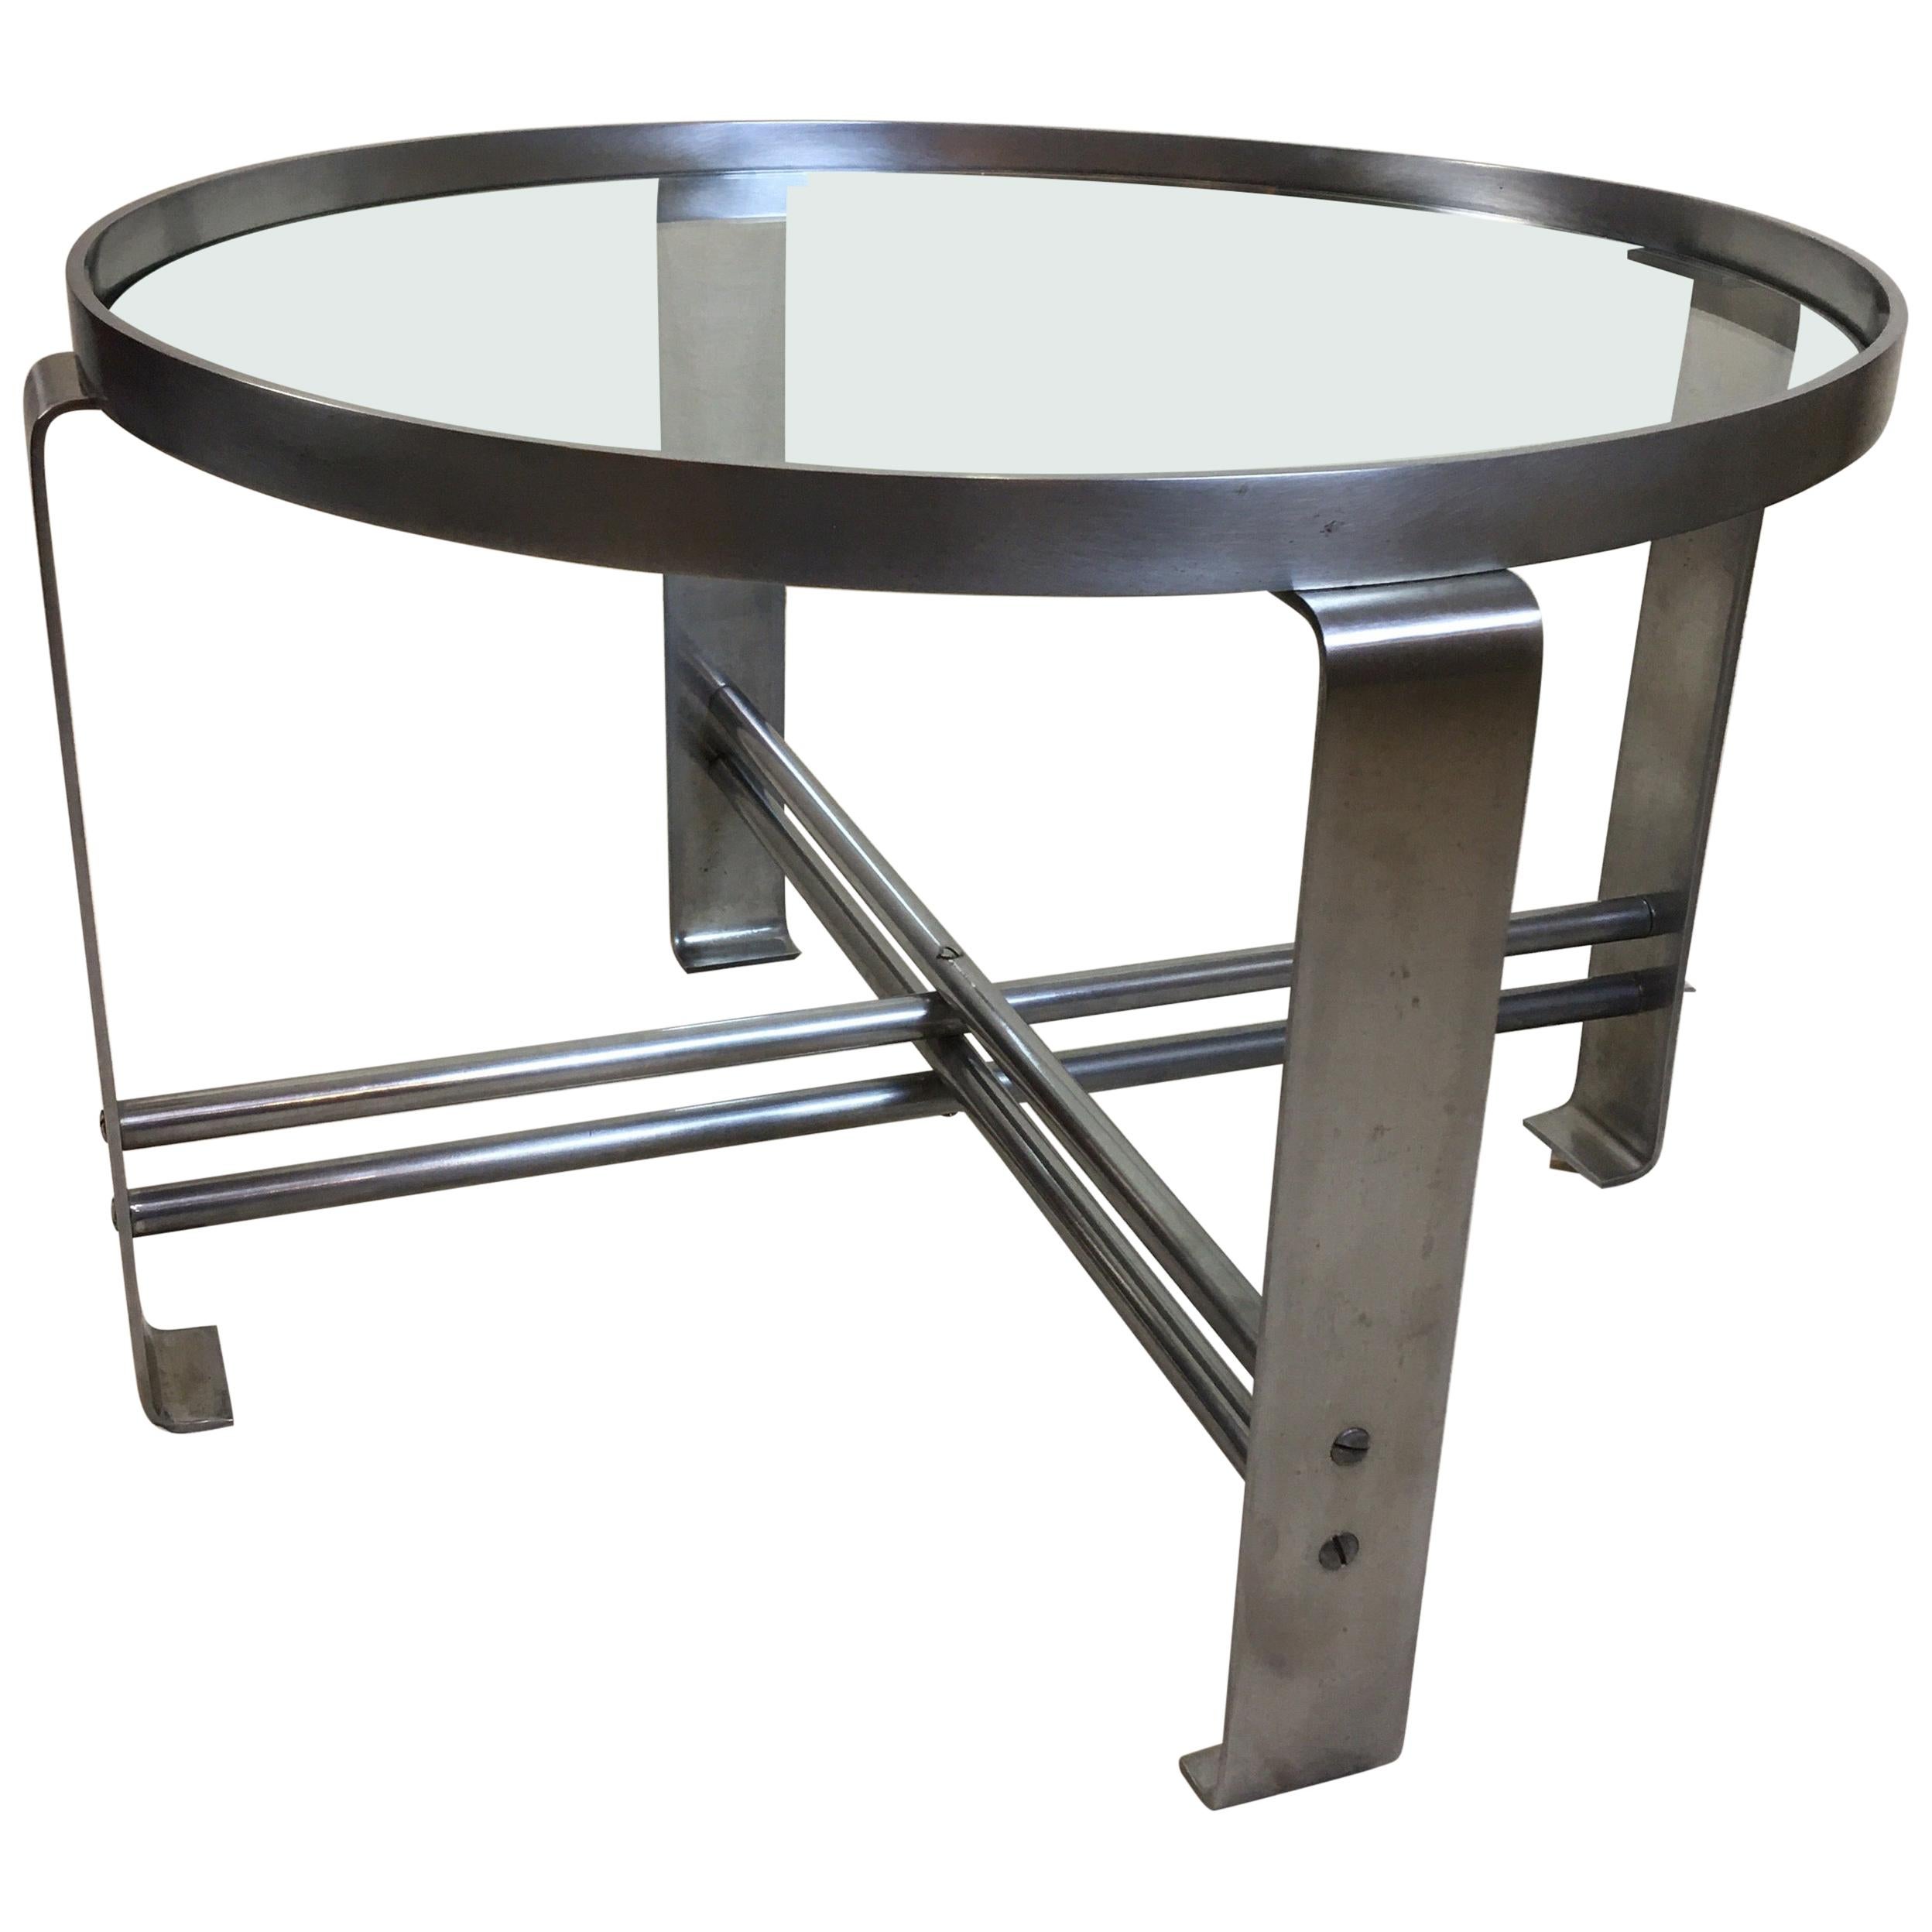 Wolfgang Hoffmann for Howell Round Chrome Coffee Table